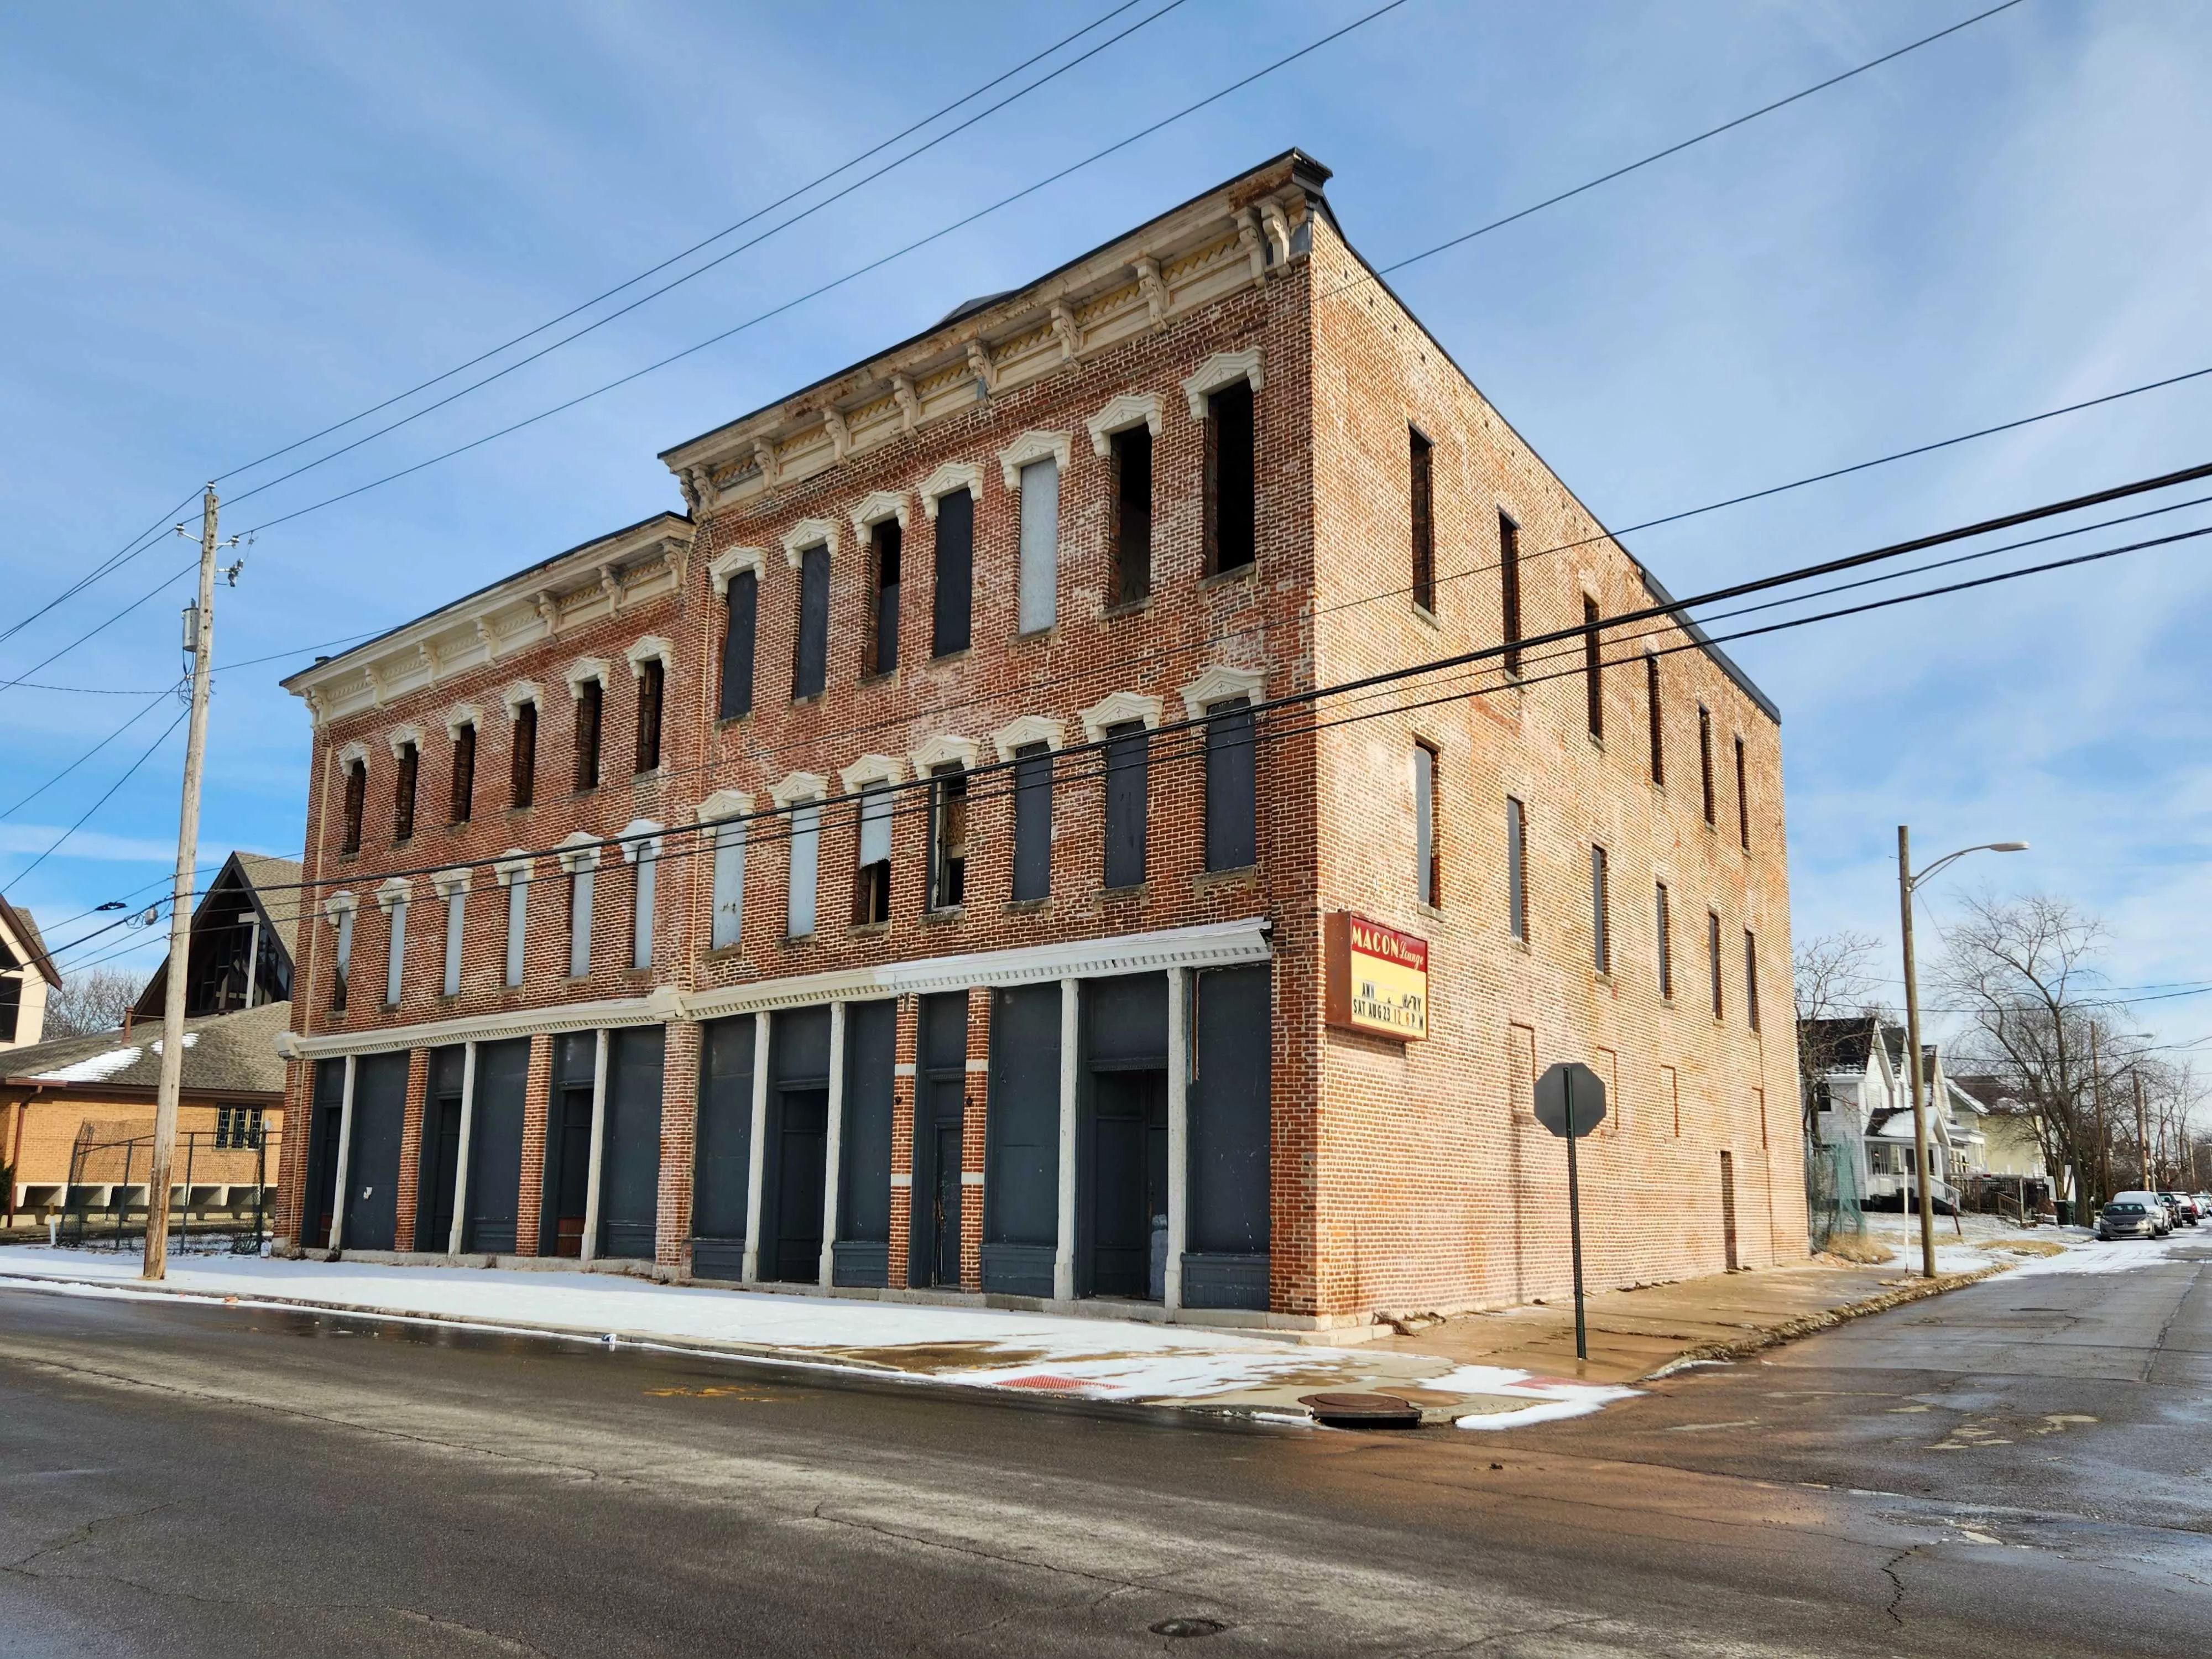 The former Macon Hotel and jazz lounge on North 20th Street in Columbus, Ohio. Photo: Tyler Buchanan/Axios